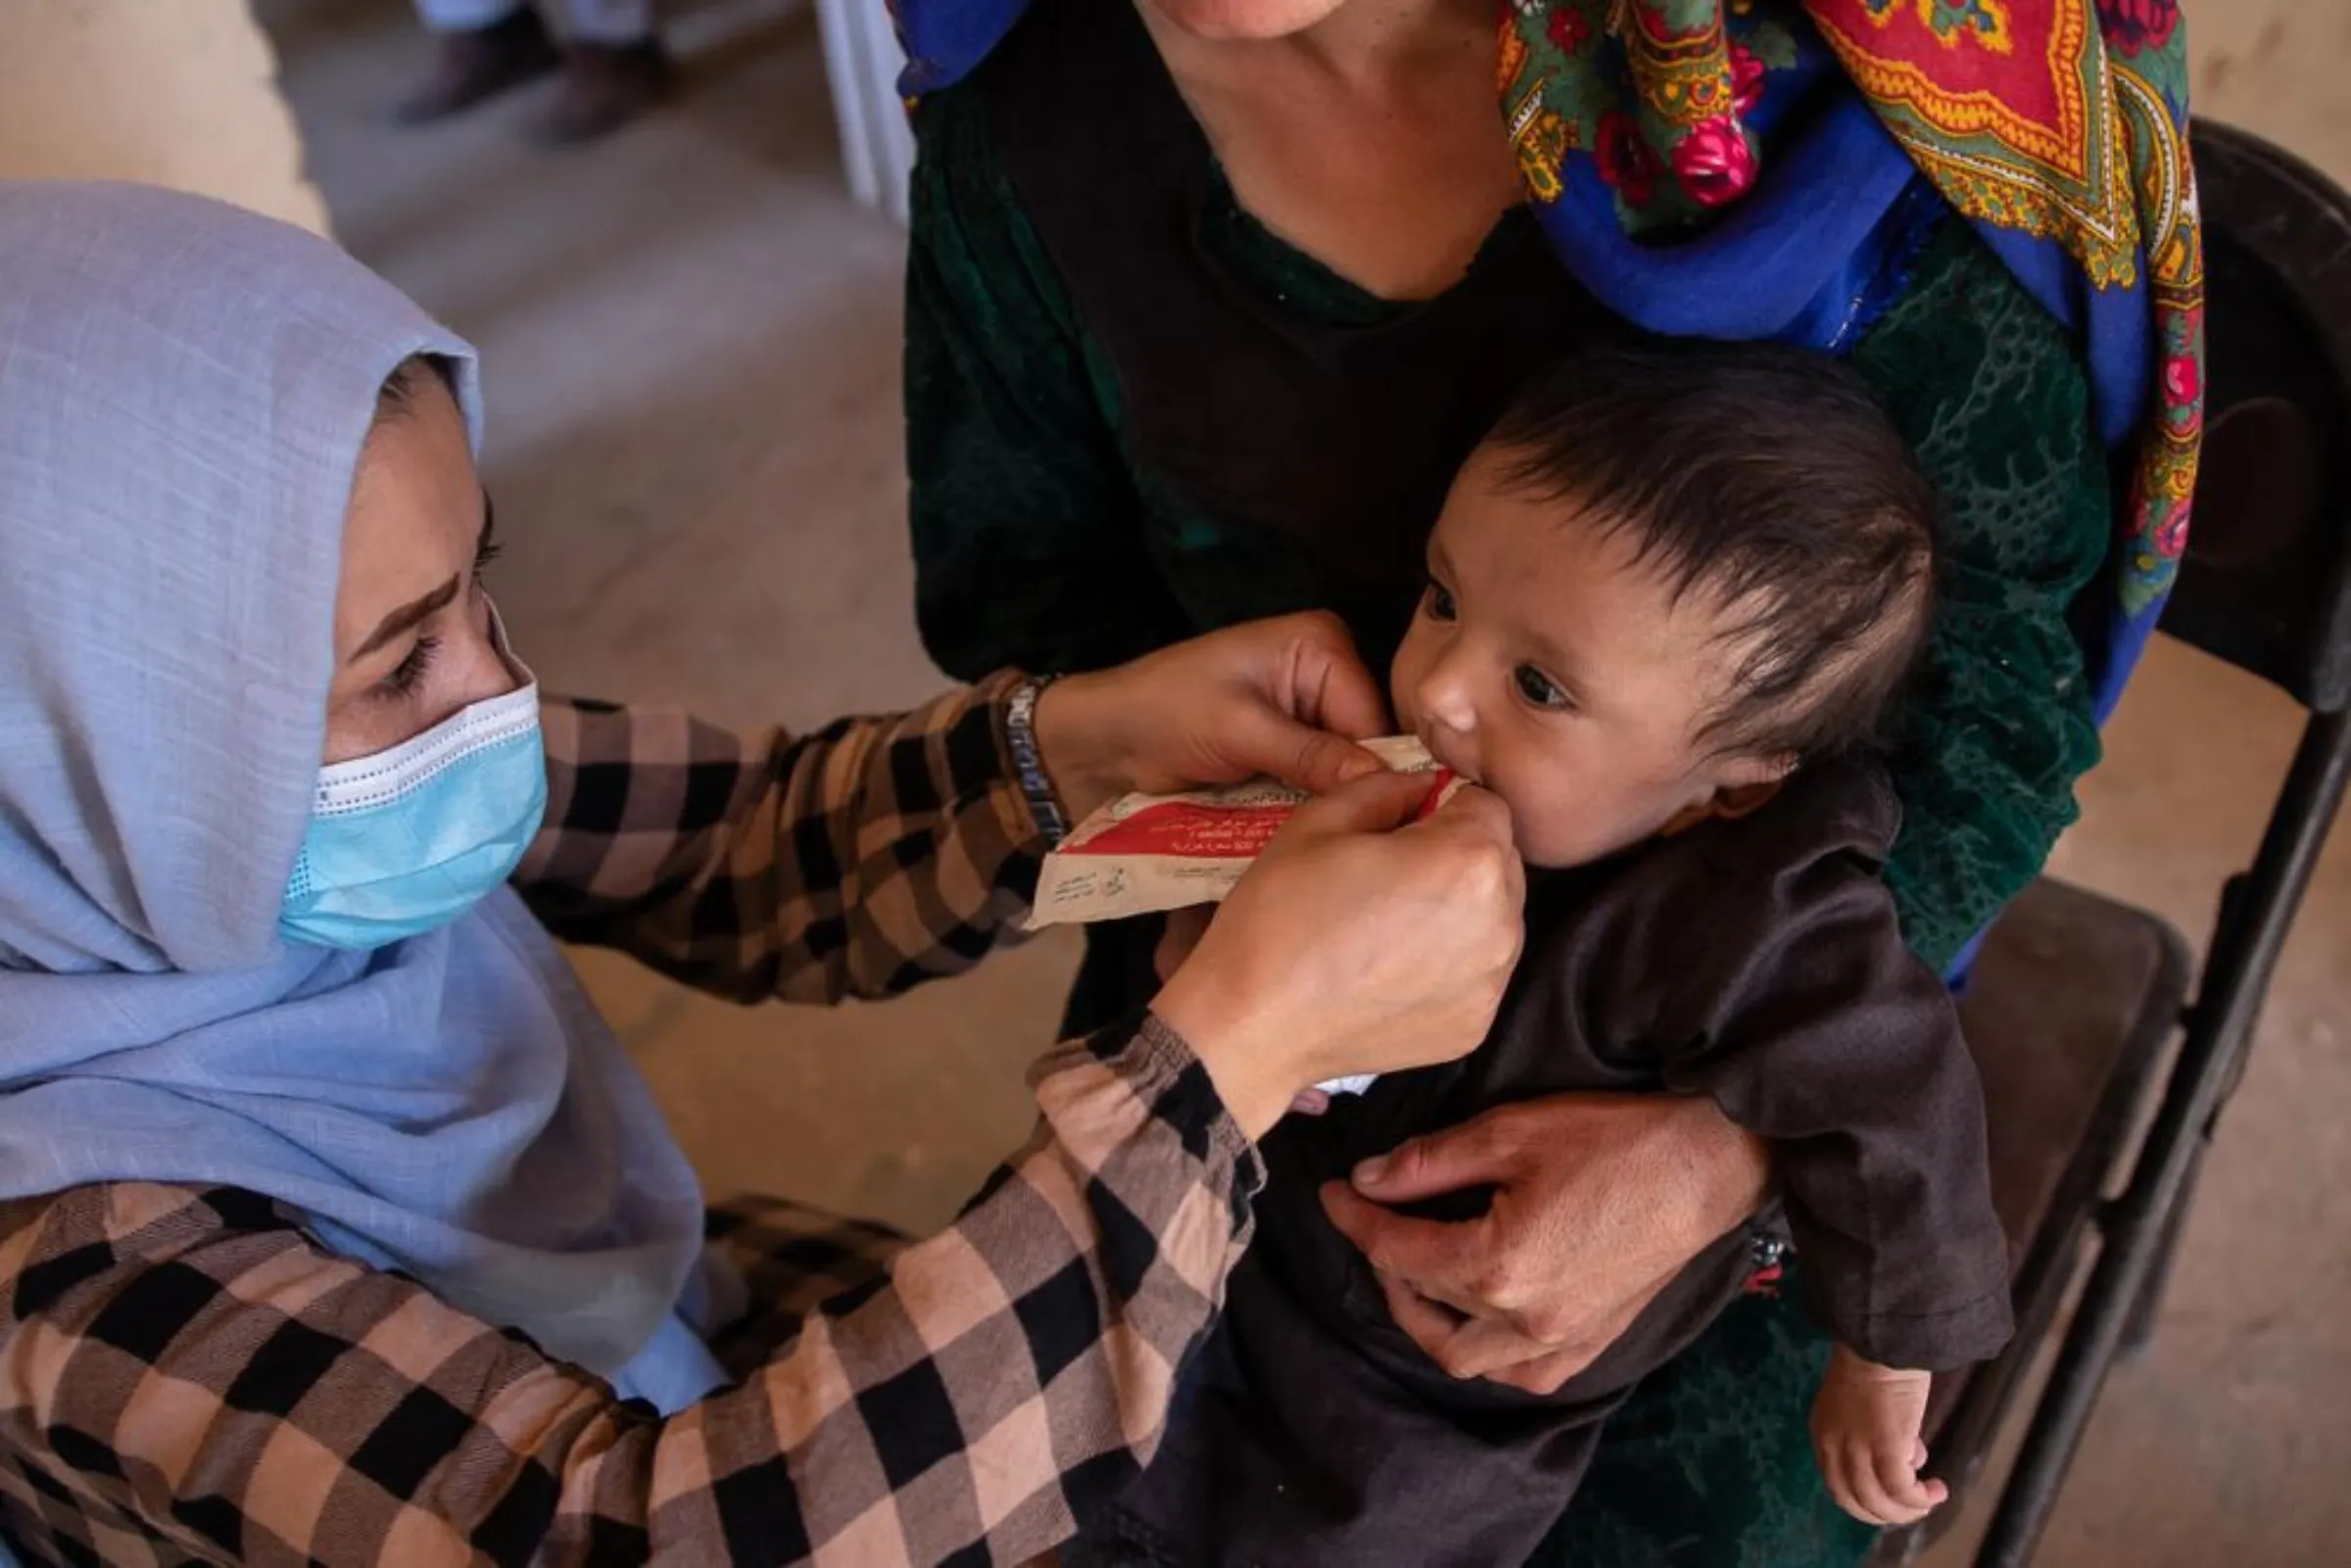 A health worker feeds a baby to treat malnutrition in Faryab province, Afghanistan, February 21, 2022